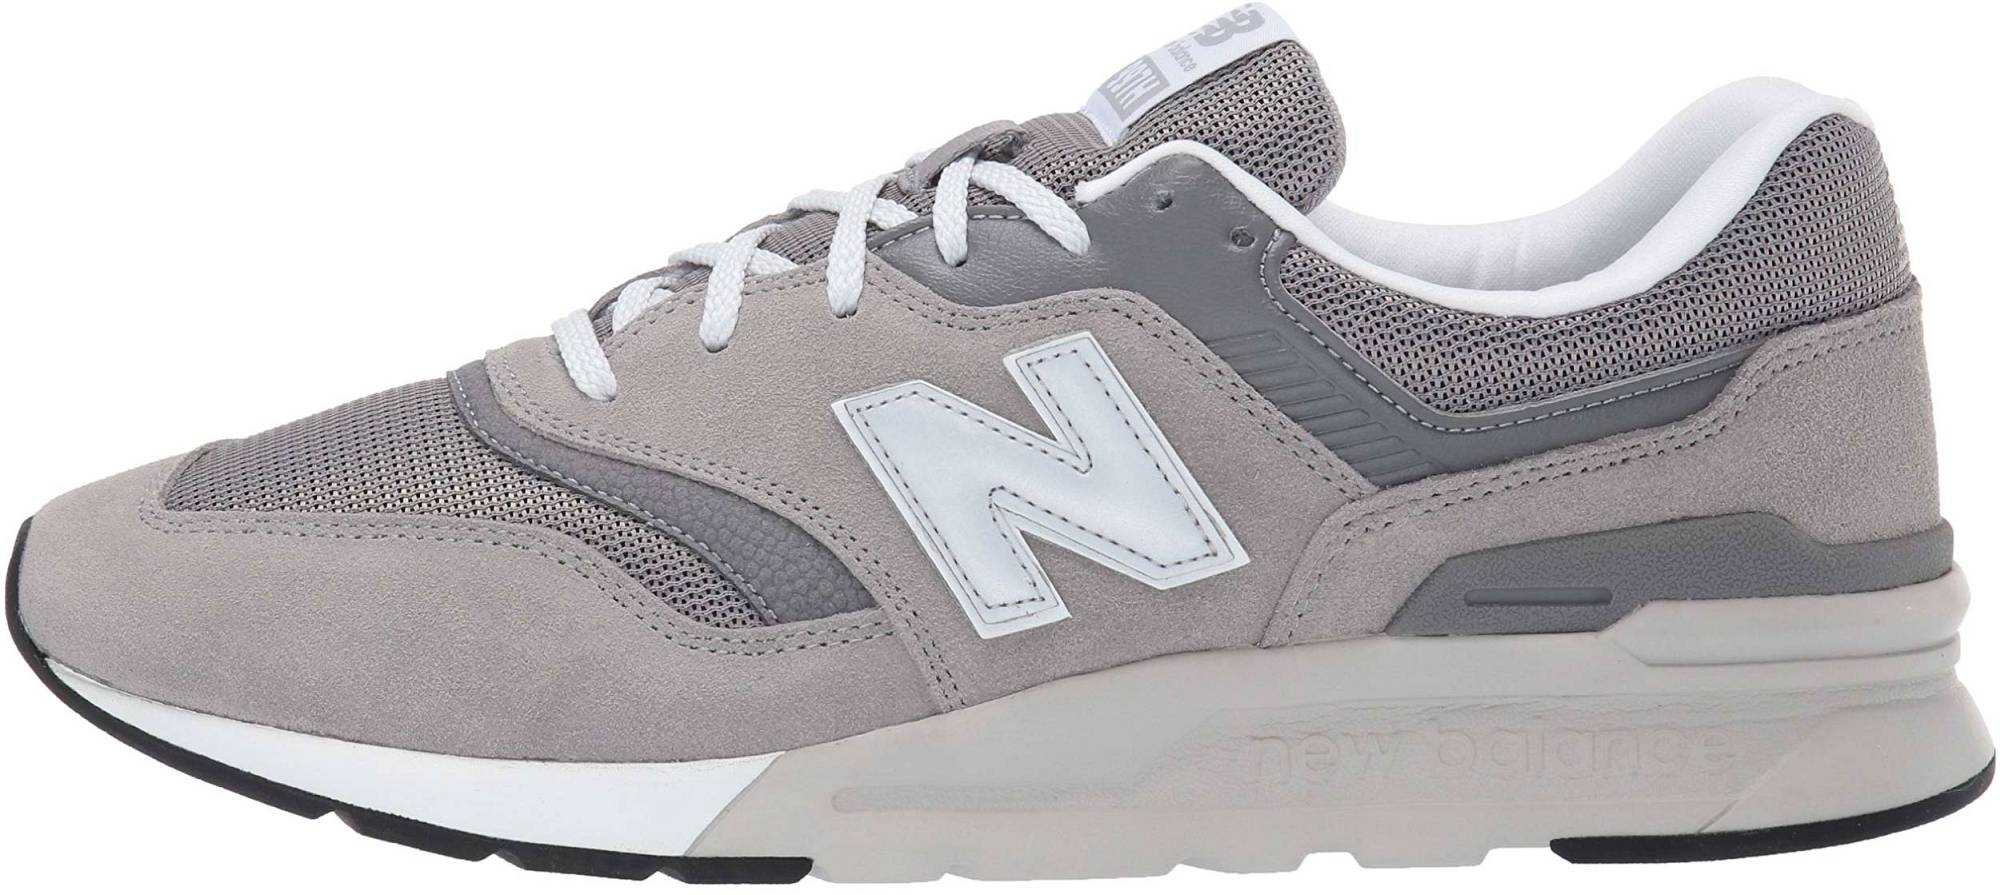 New Balance 997H – Shoes Reviews & Reasons To Buy